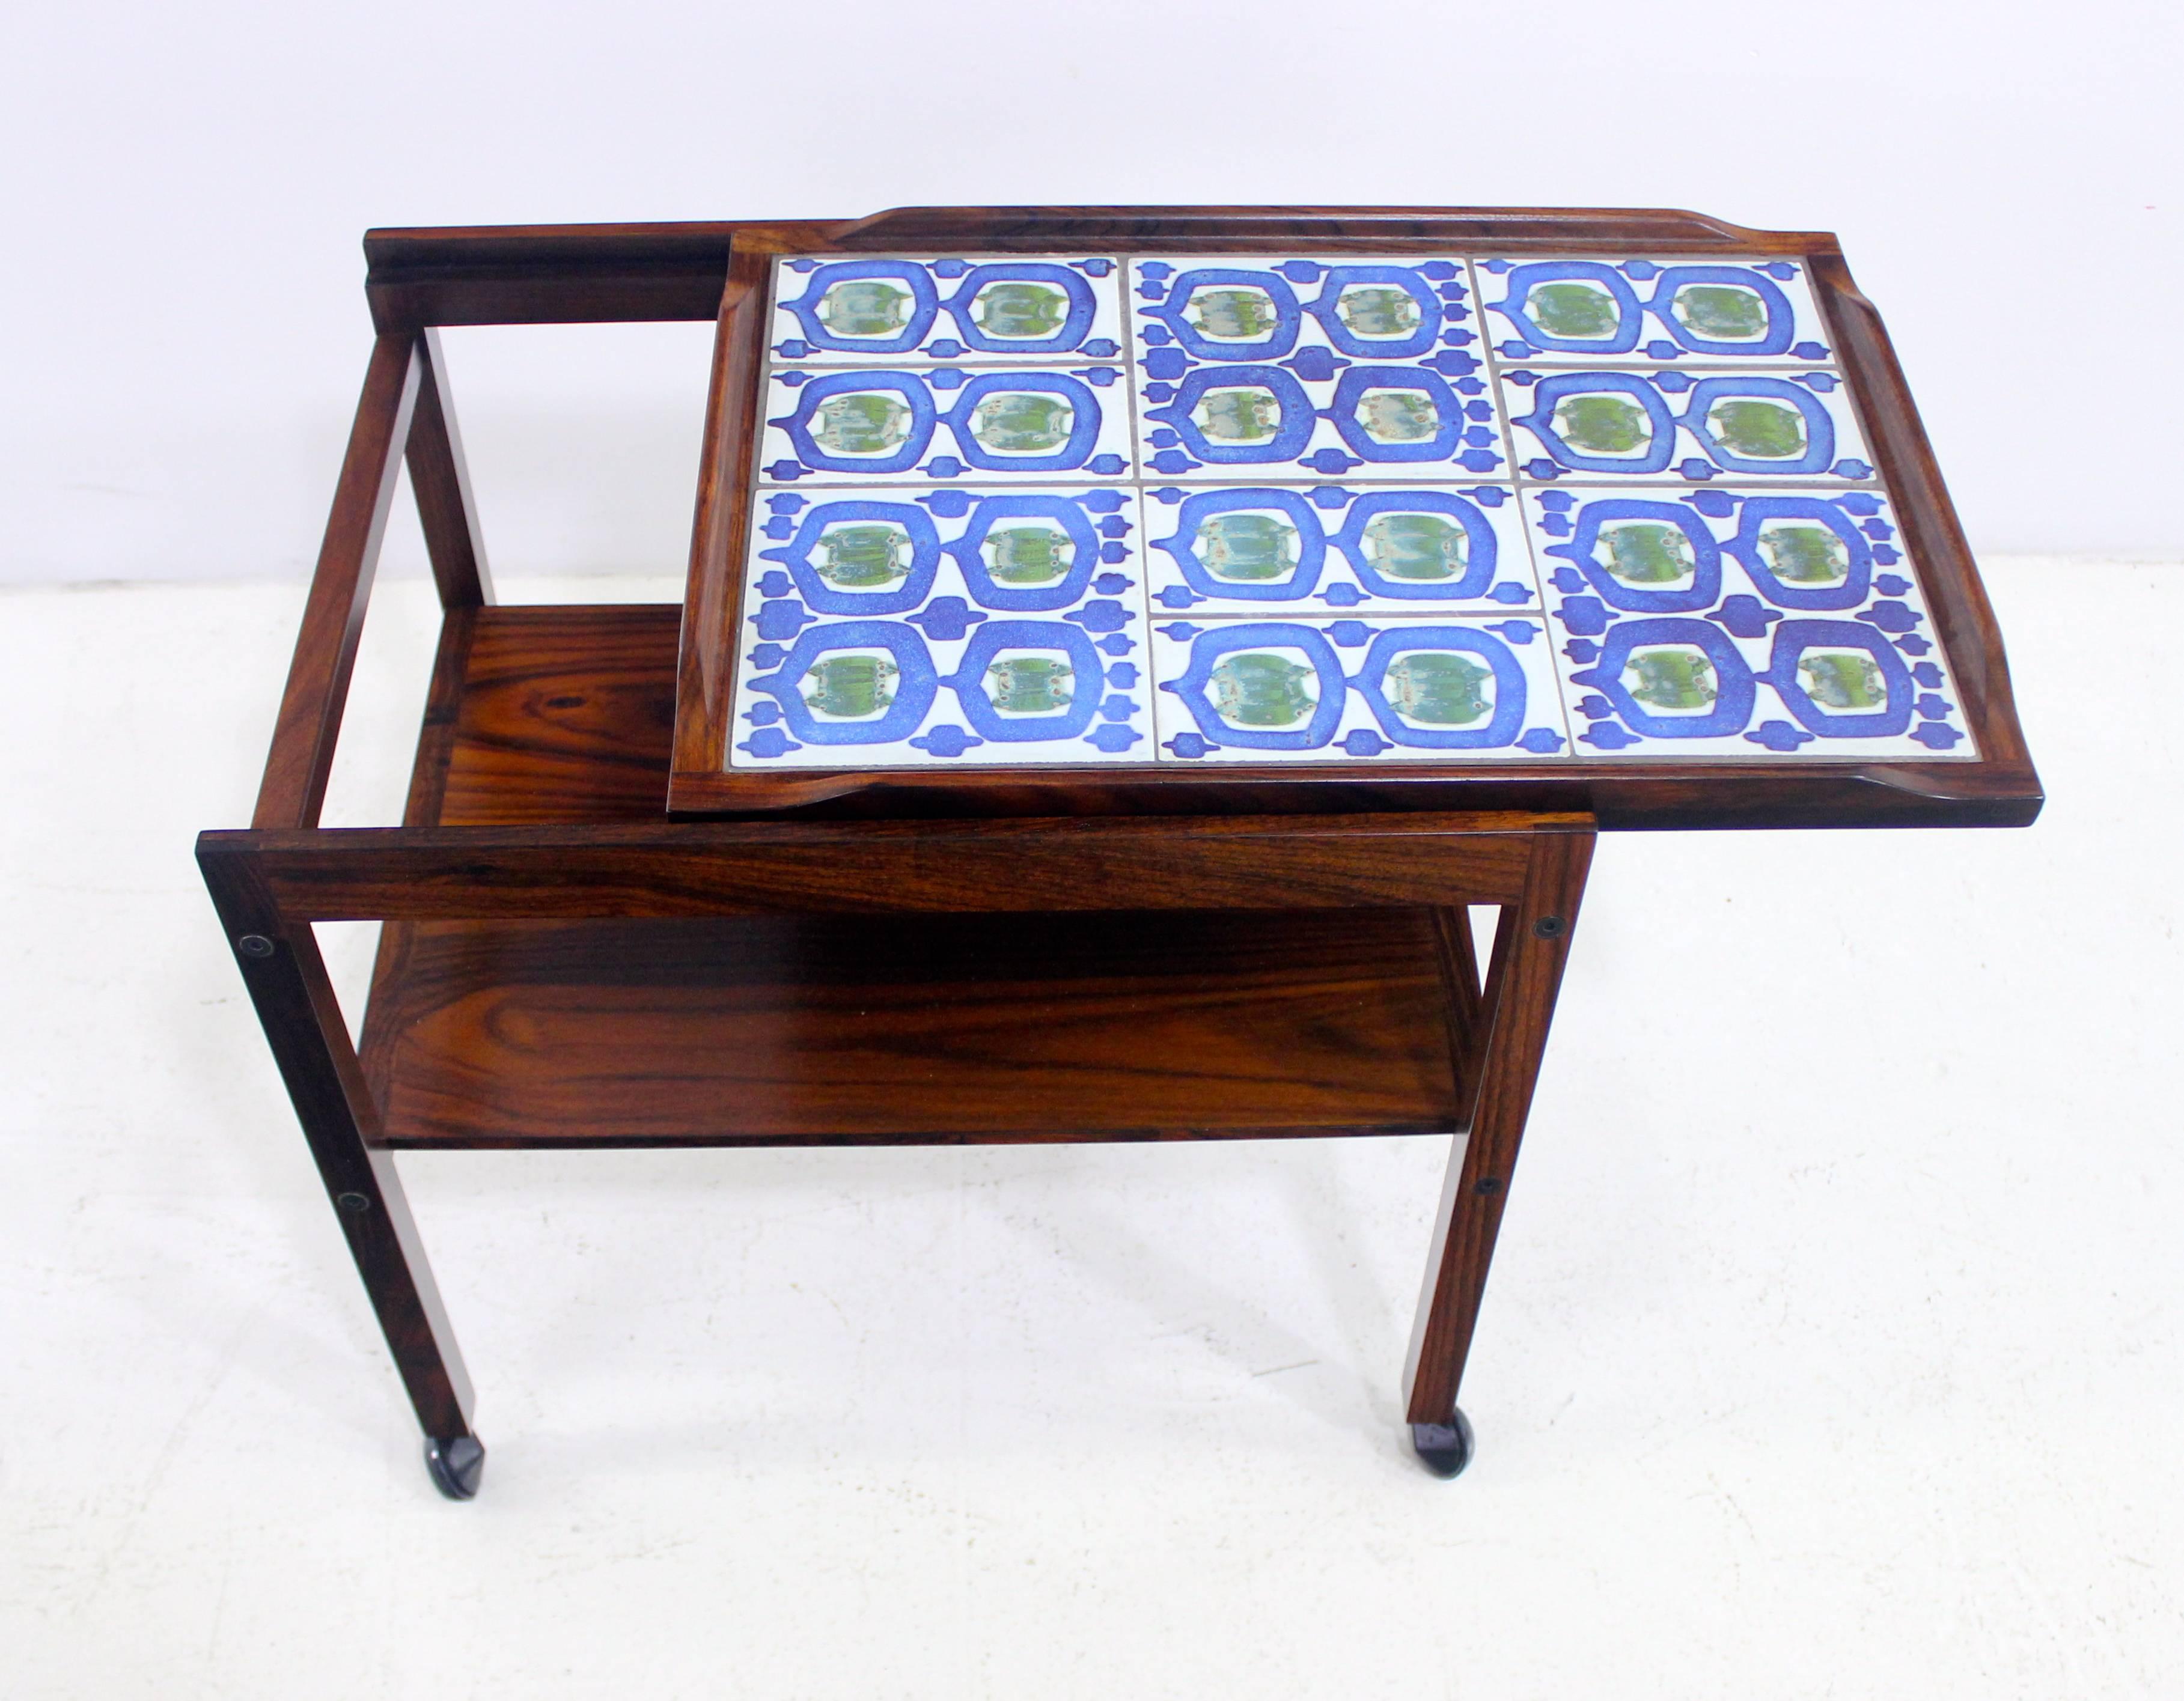 Danish Modern Rosewood Tea Cart with Royal Copenhagen Tiles by Severin Hansen Jr In Excellent Condition For Sale In Portland, OR